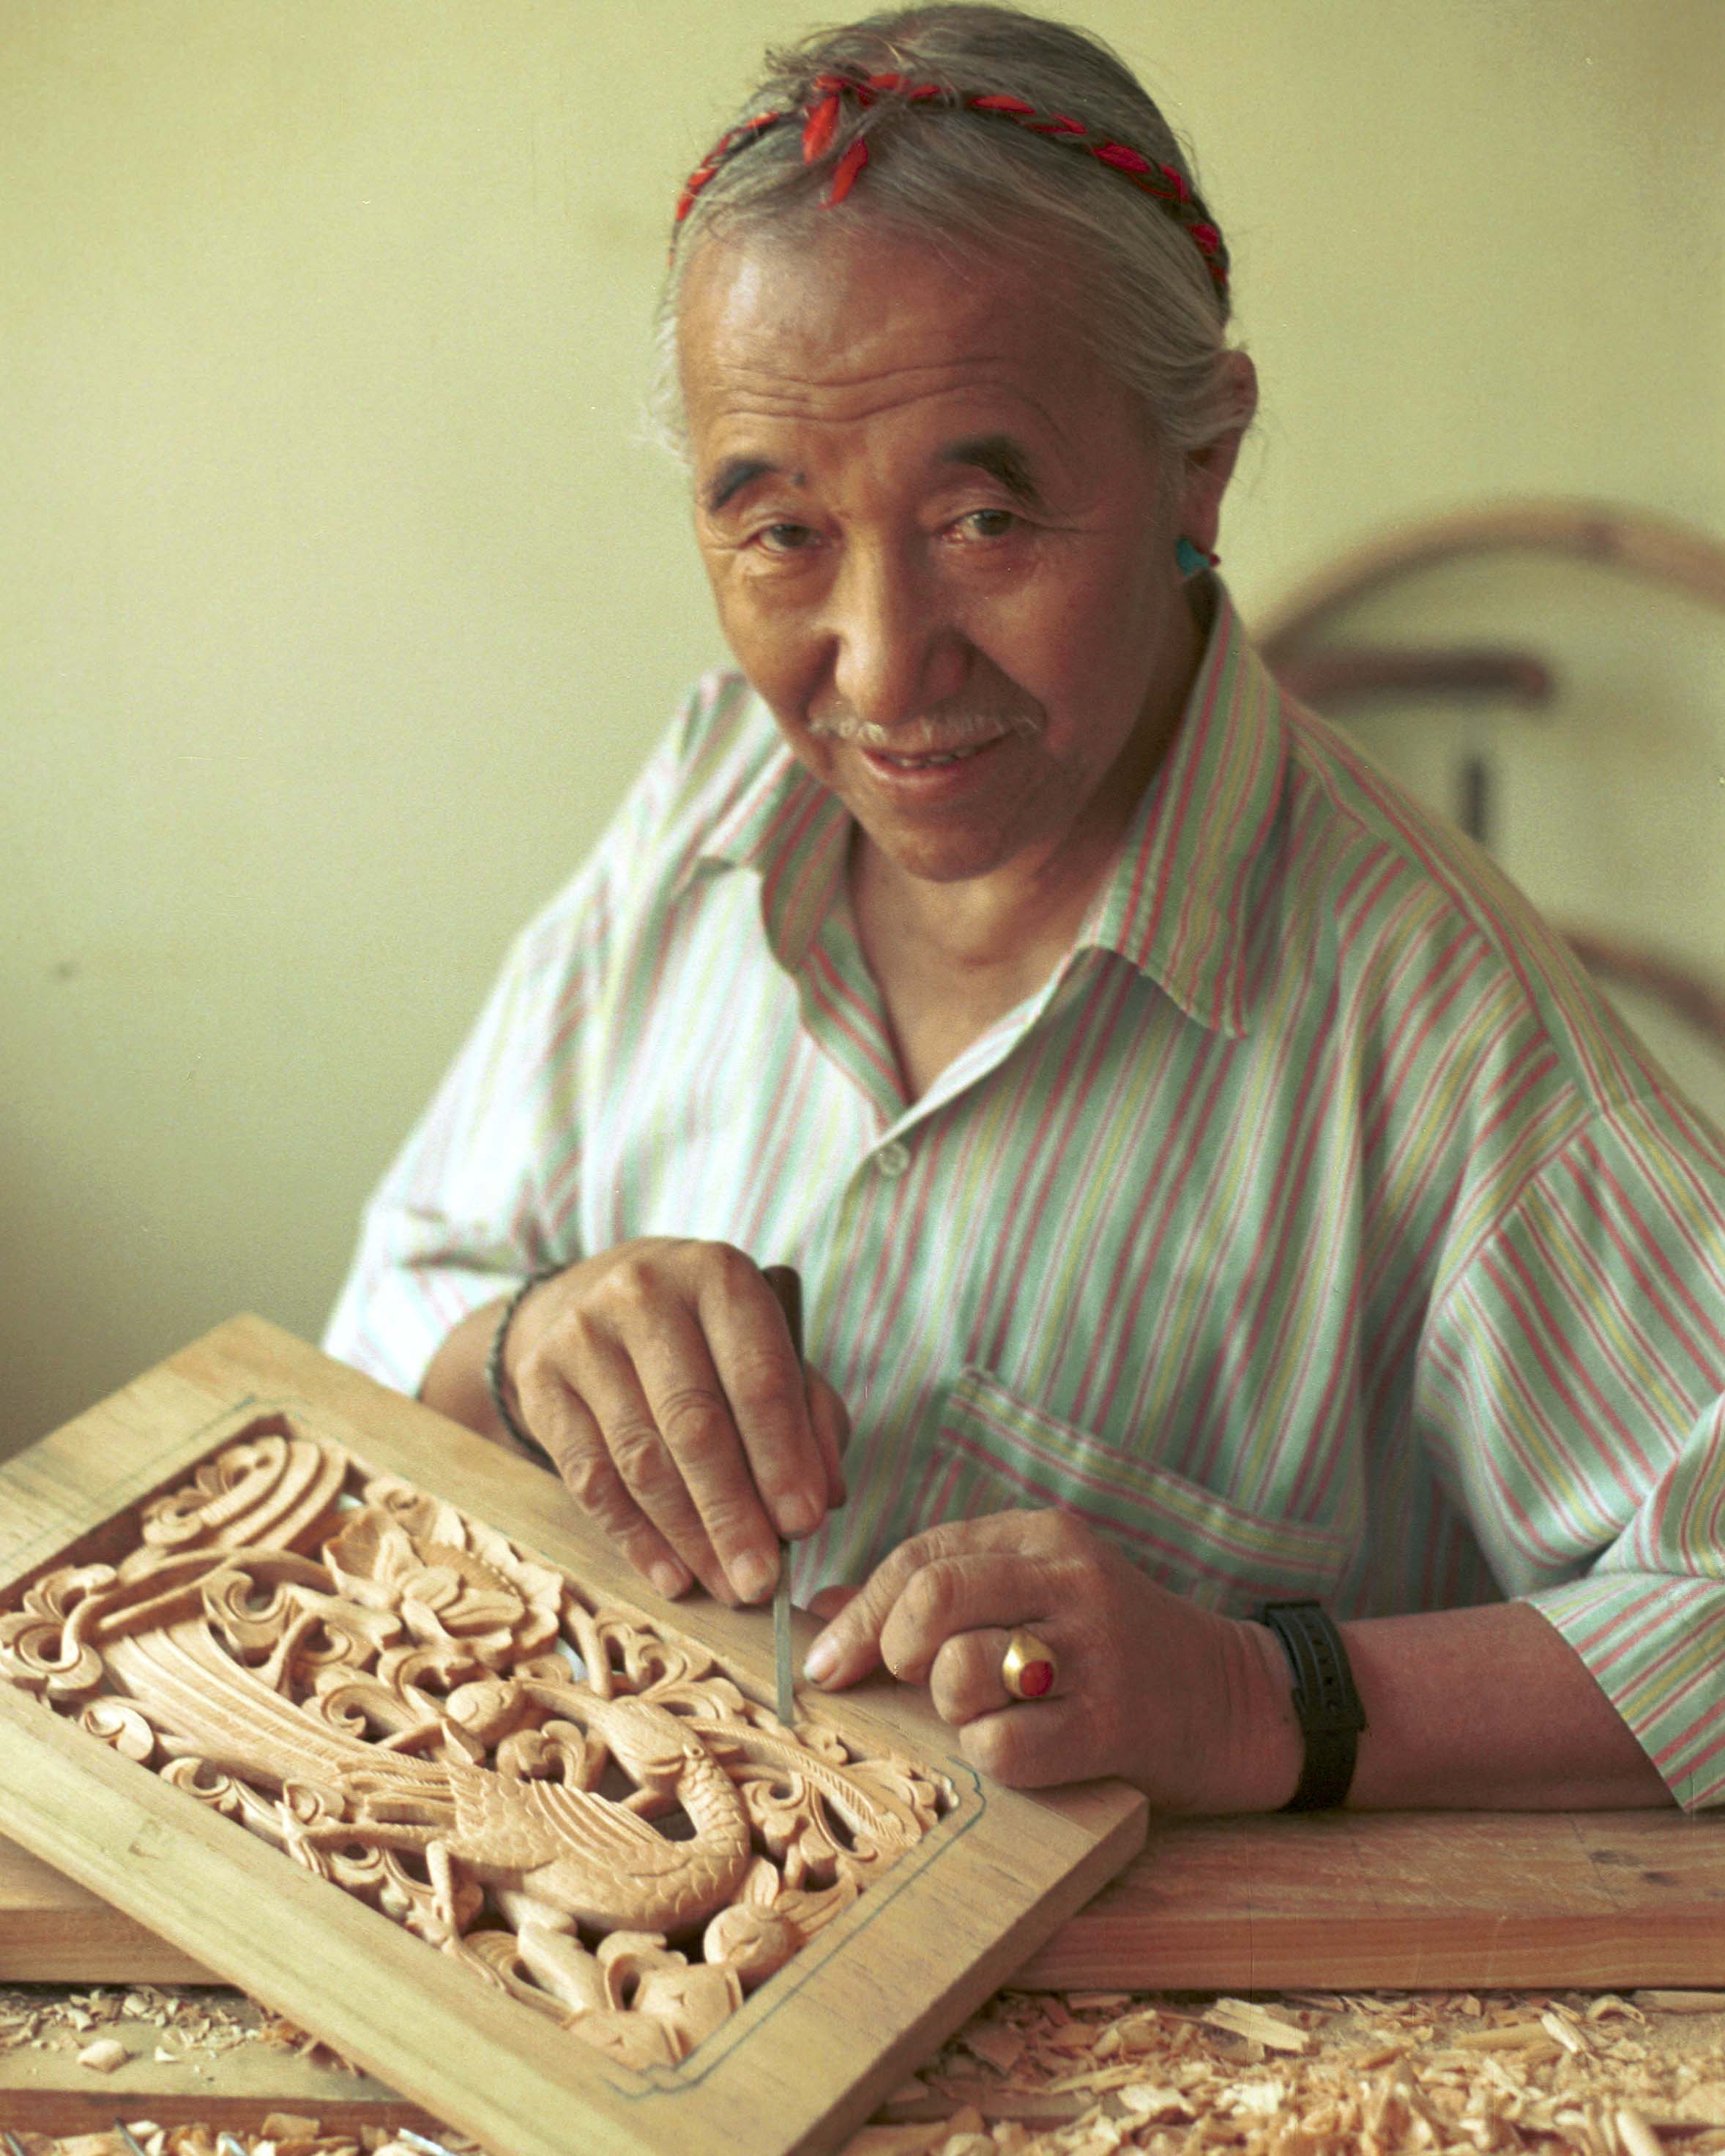 Types of Wood Carving - 5 most common types of wood carving